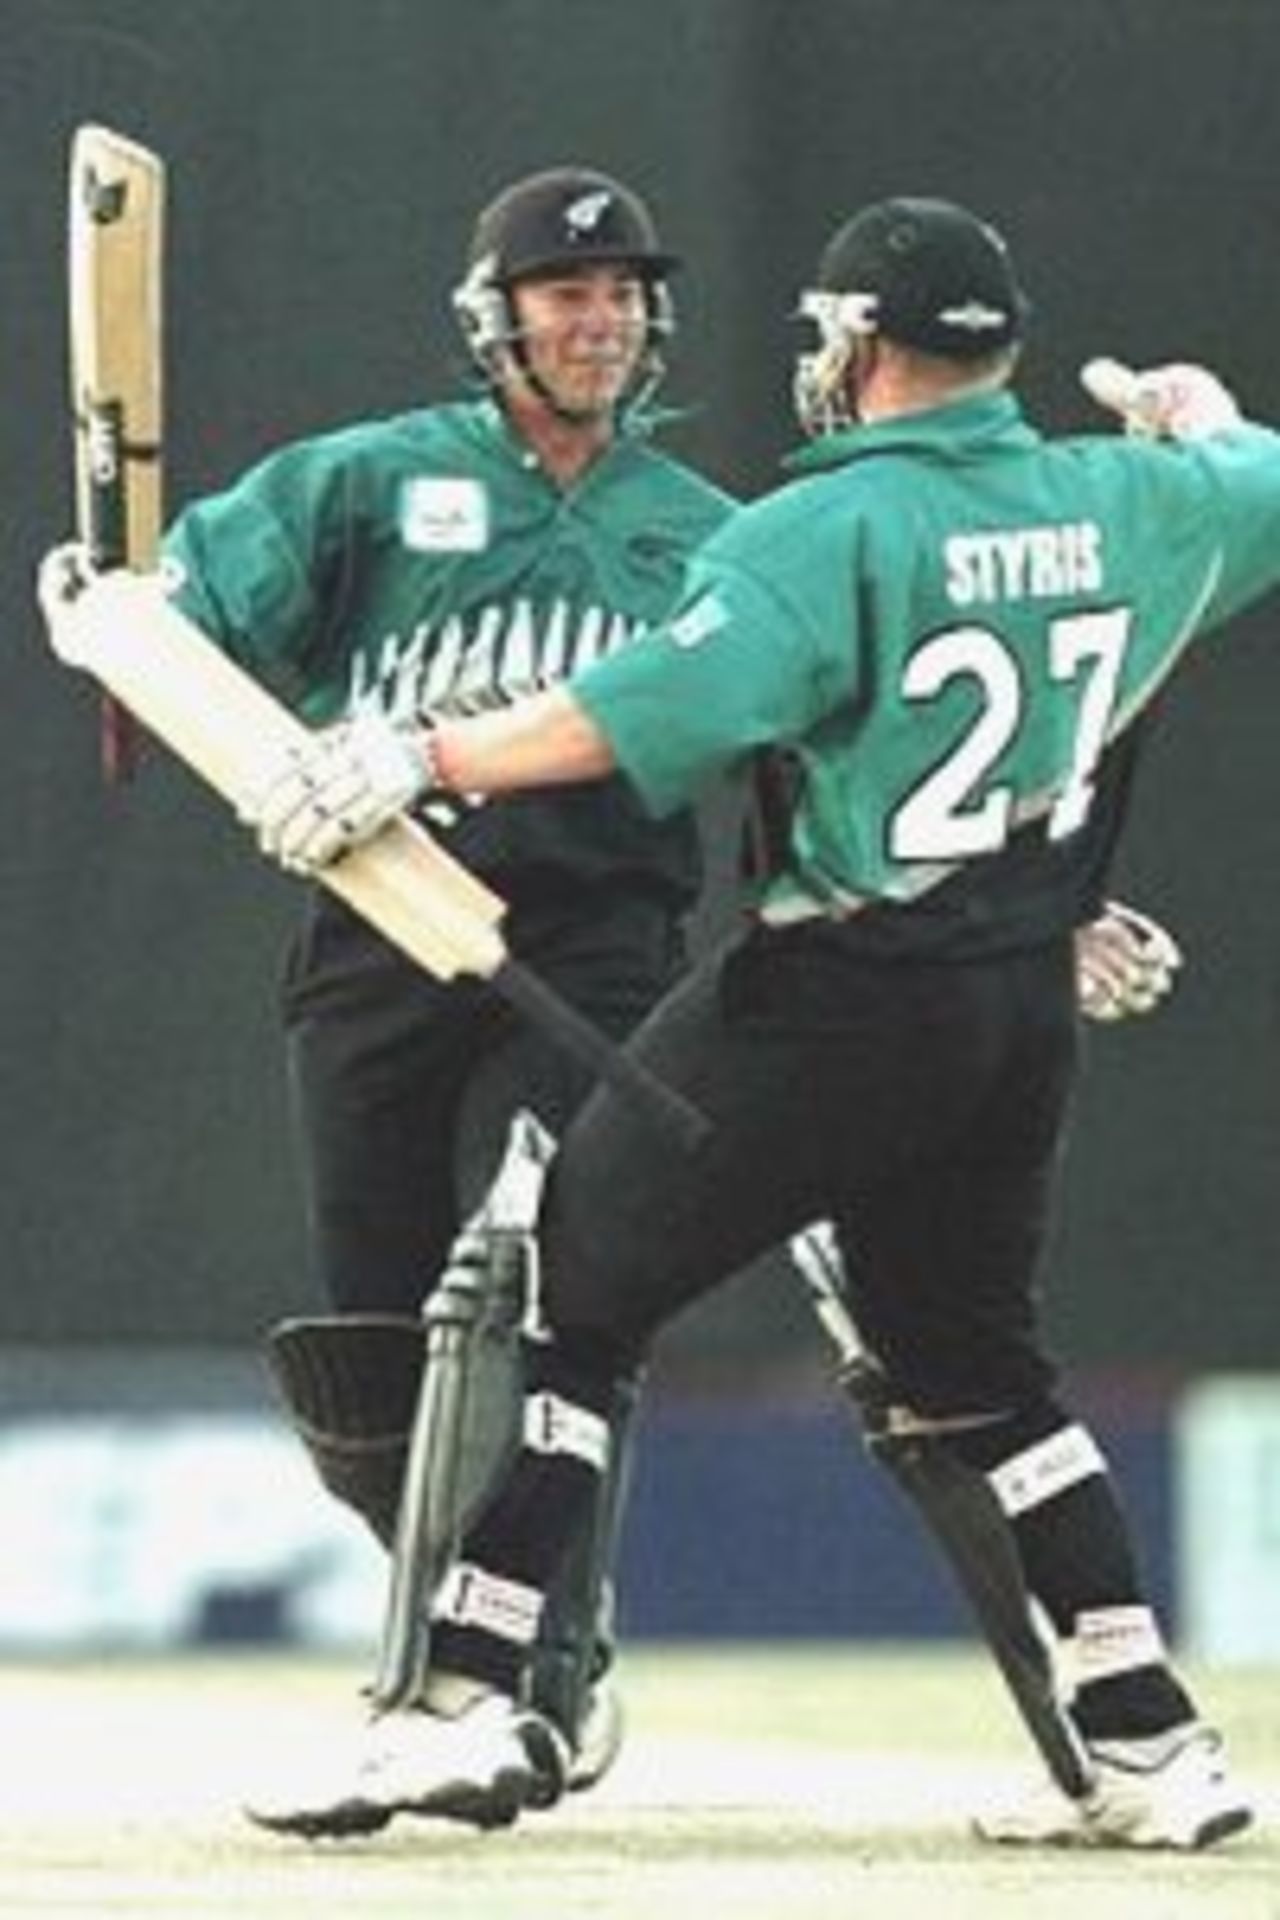 11 Oct 2000: Craig McMillan of New Zealand (left) celebrates with Scott Styris of New Zealand as they score the winning runs in the Semi final of the New Zealand v Pakistan ICC Knockout Trophy tournament at the Gymkhana Club Ground, Nairobi, Kenya.